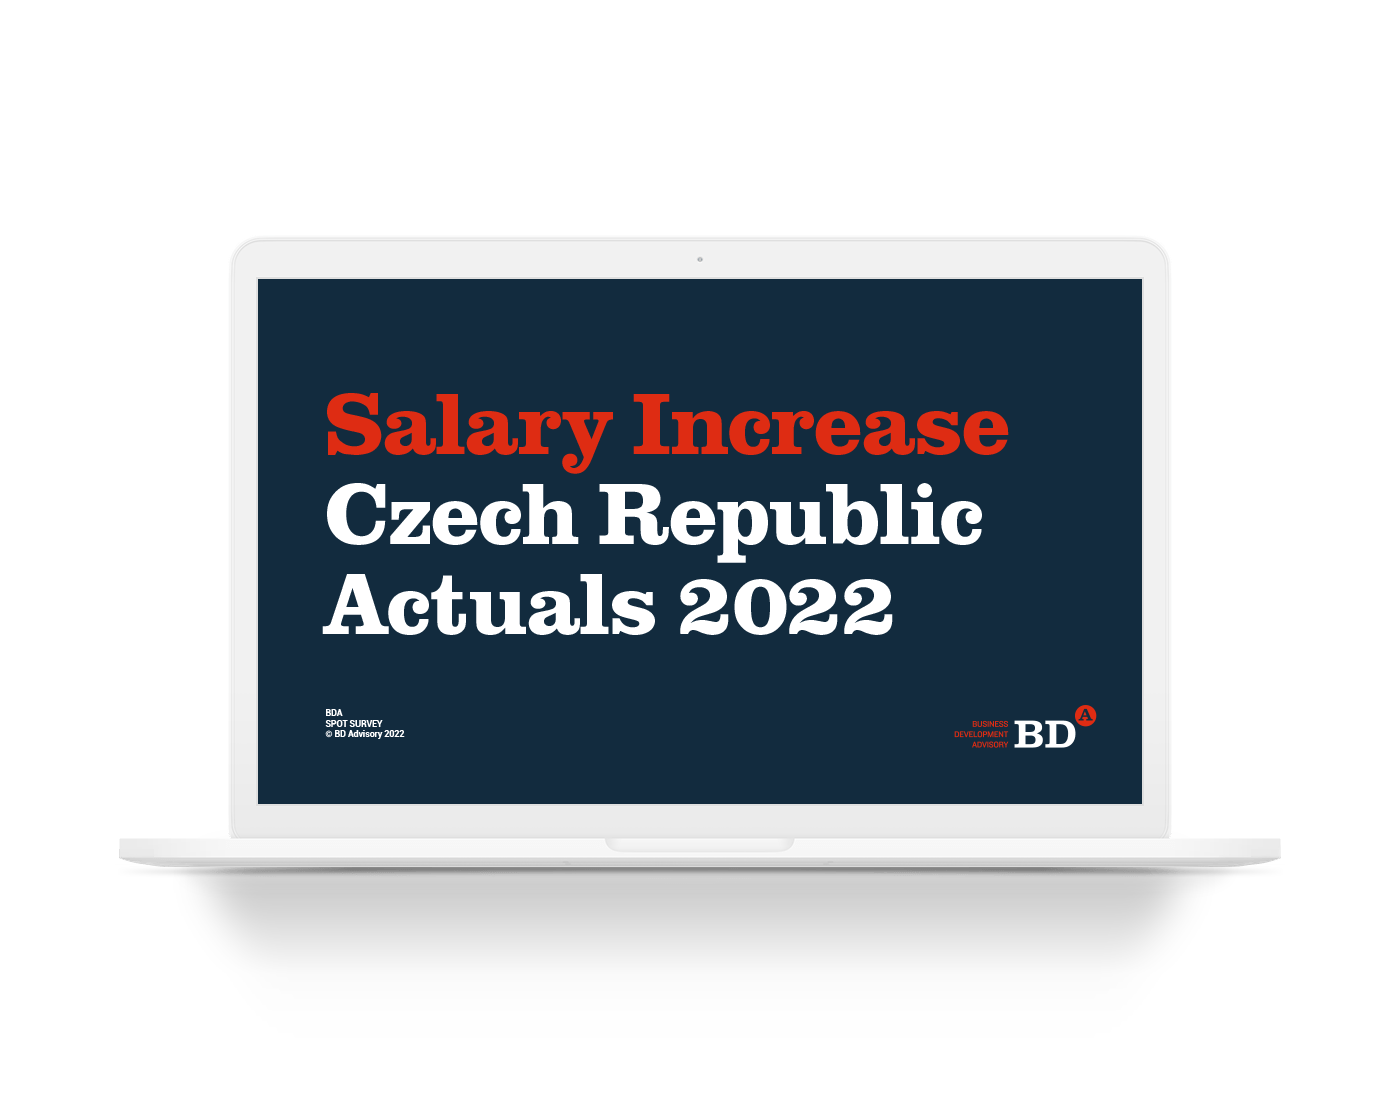 BDA Salary Increase Actuals May 2022 Effective Pay Cost Management